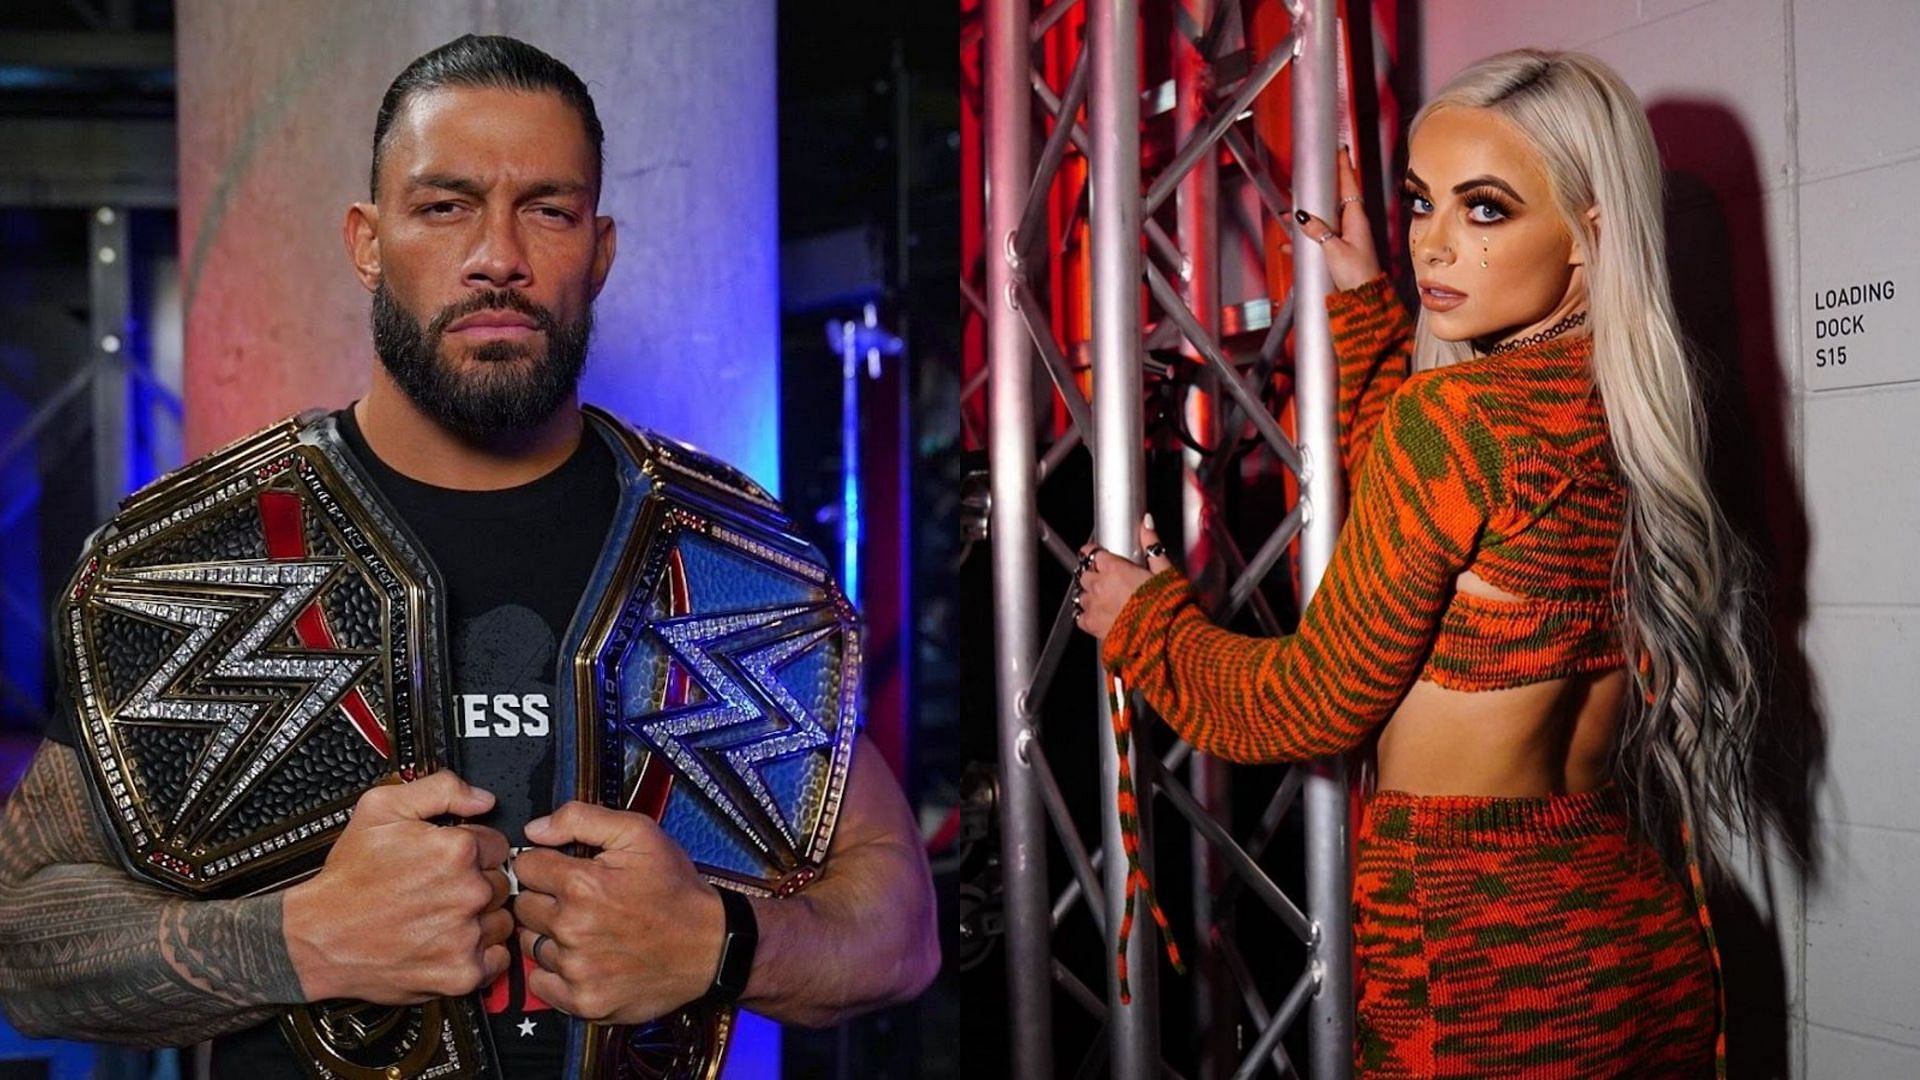 Roman Reigns (left) and Liv Morgan (right) are Geminis